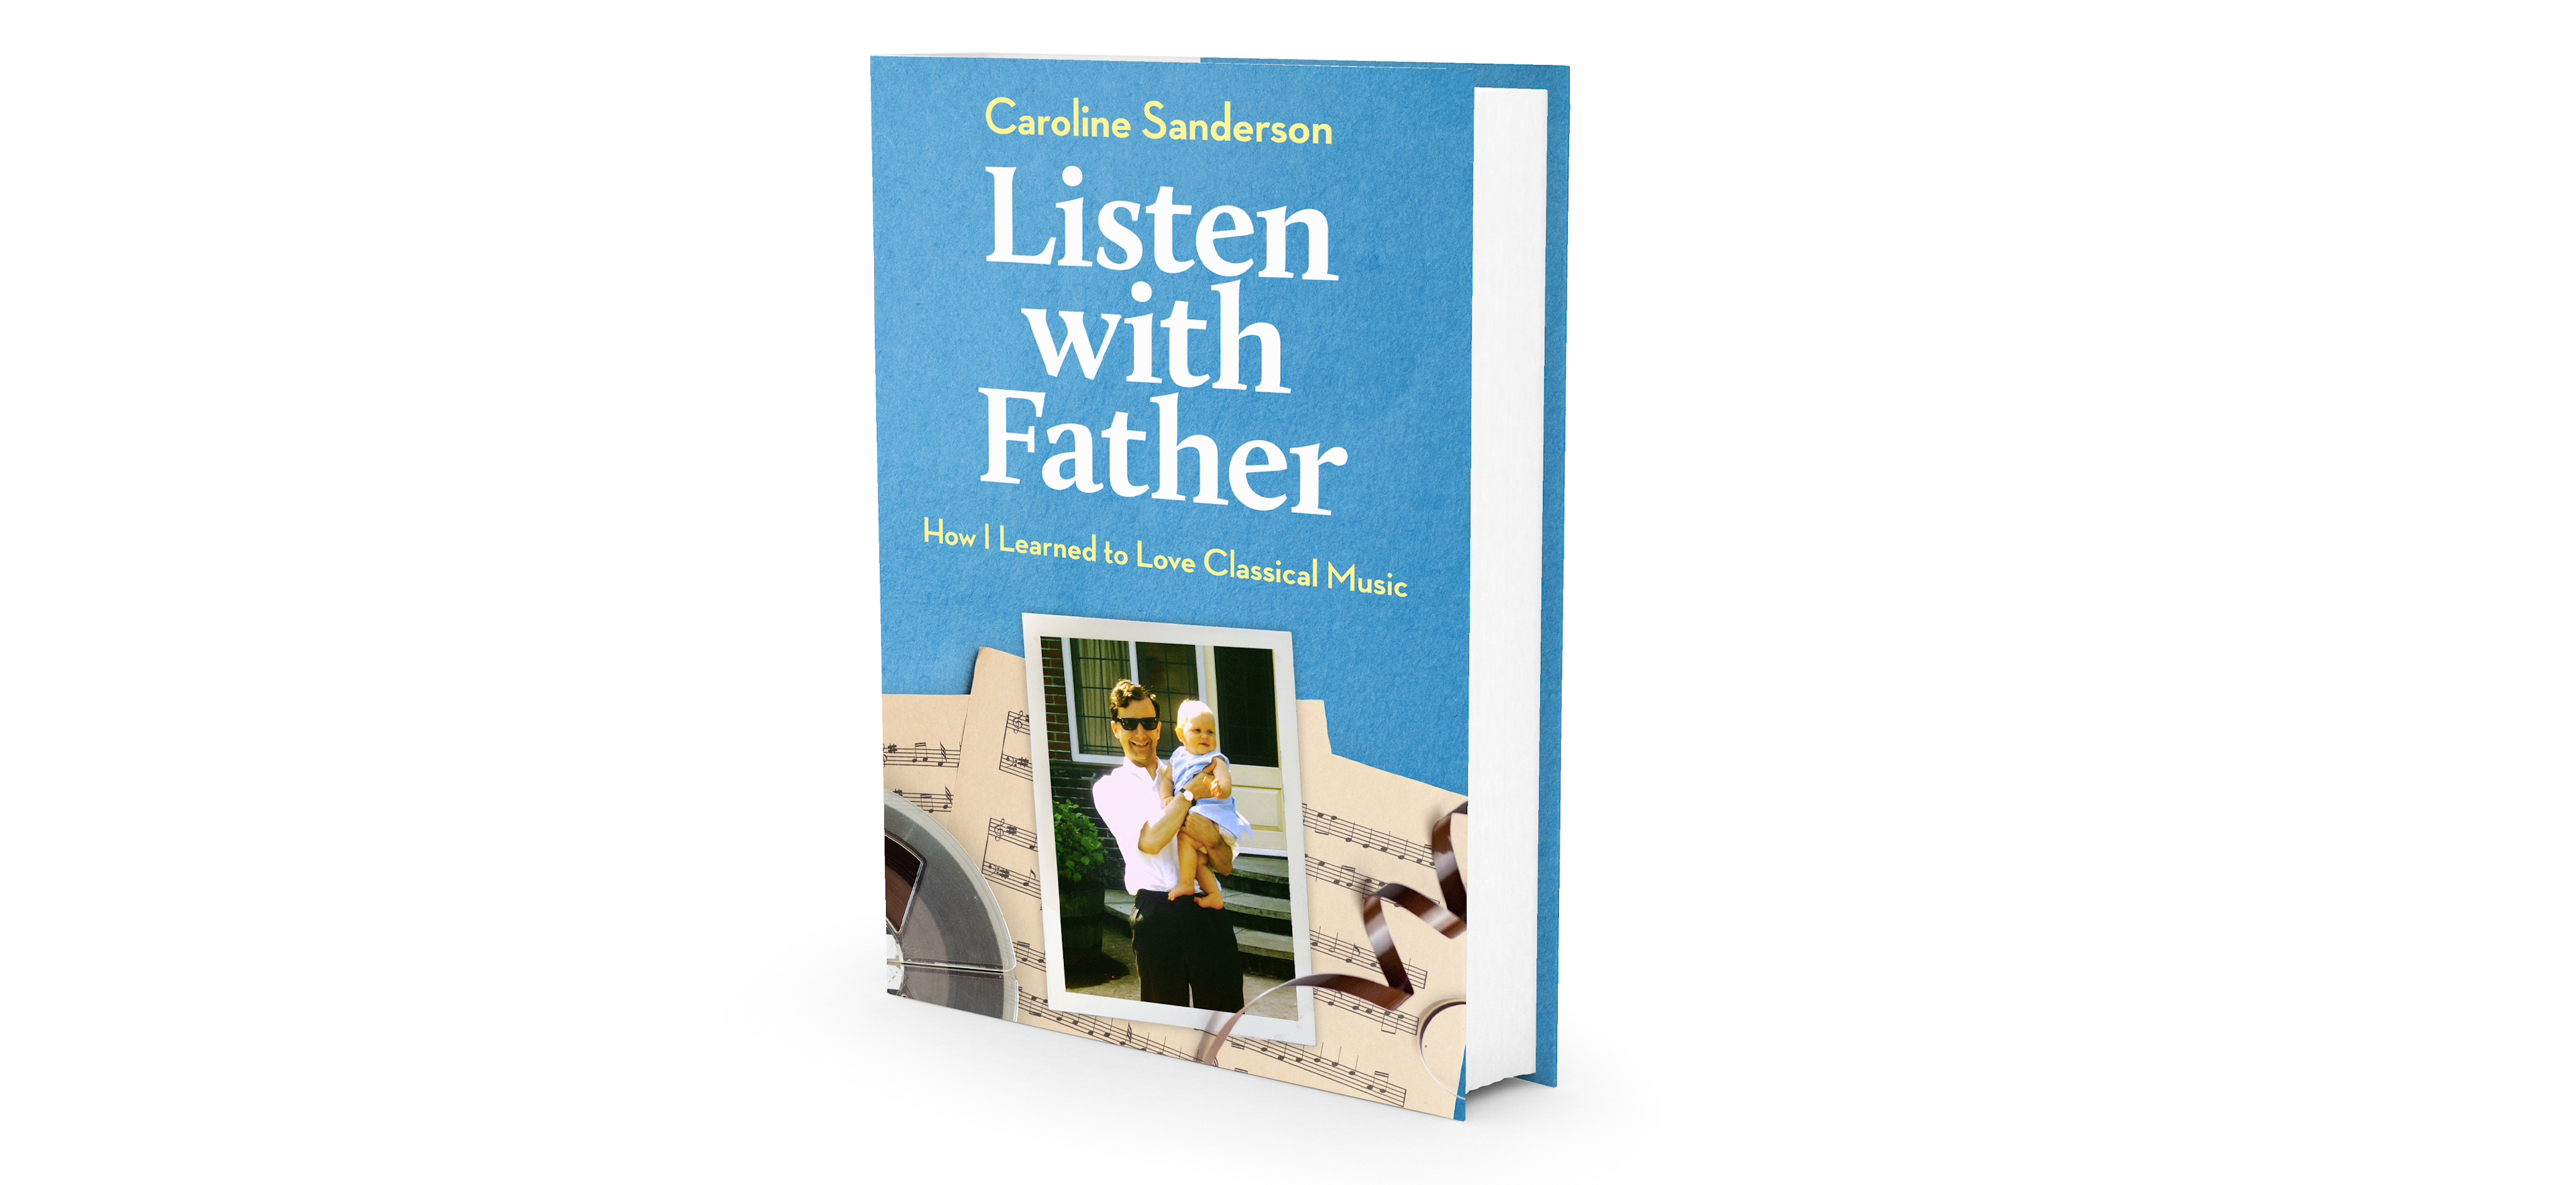 Listen with Father: How I Learned to Love Classical Music